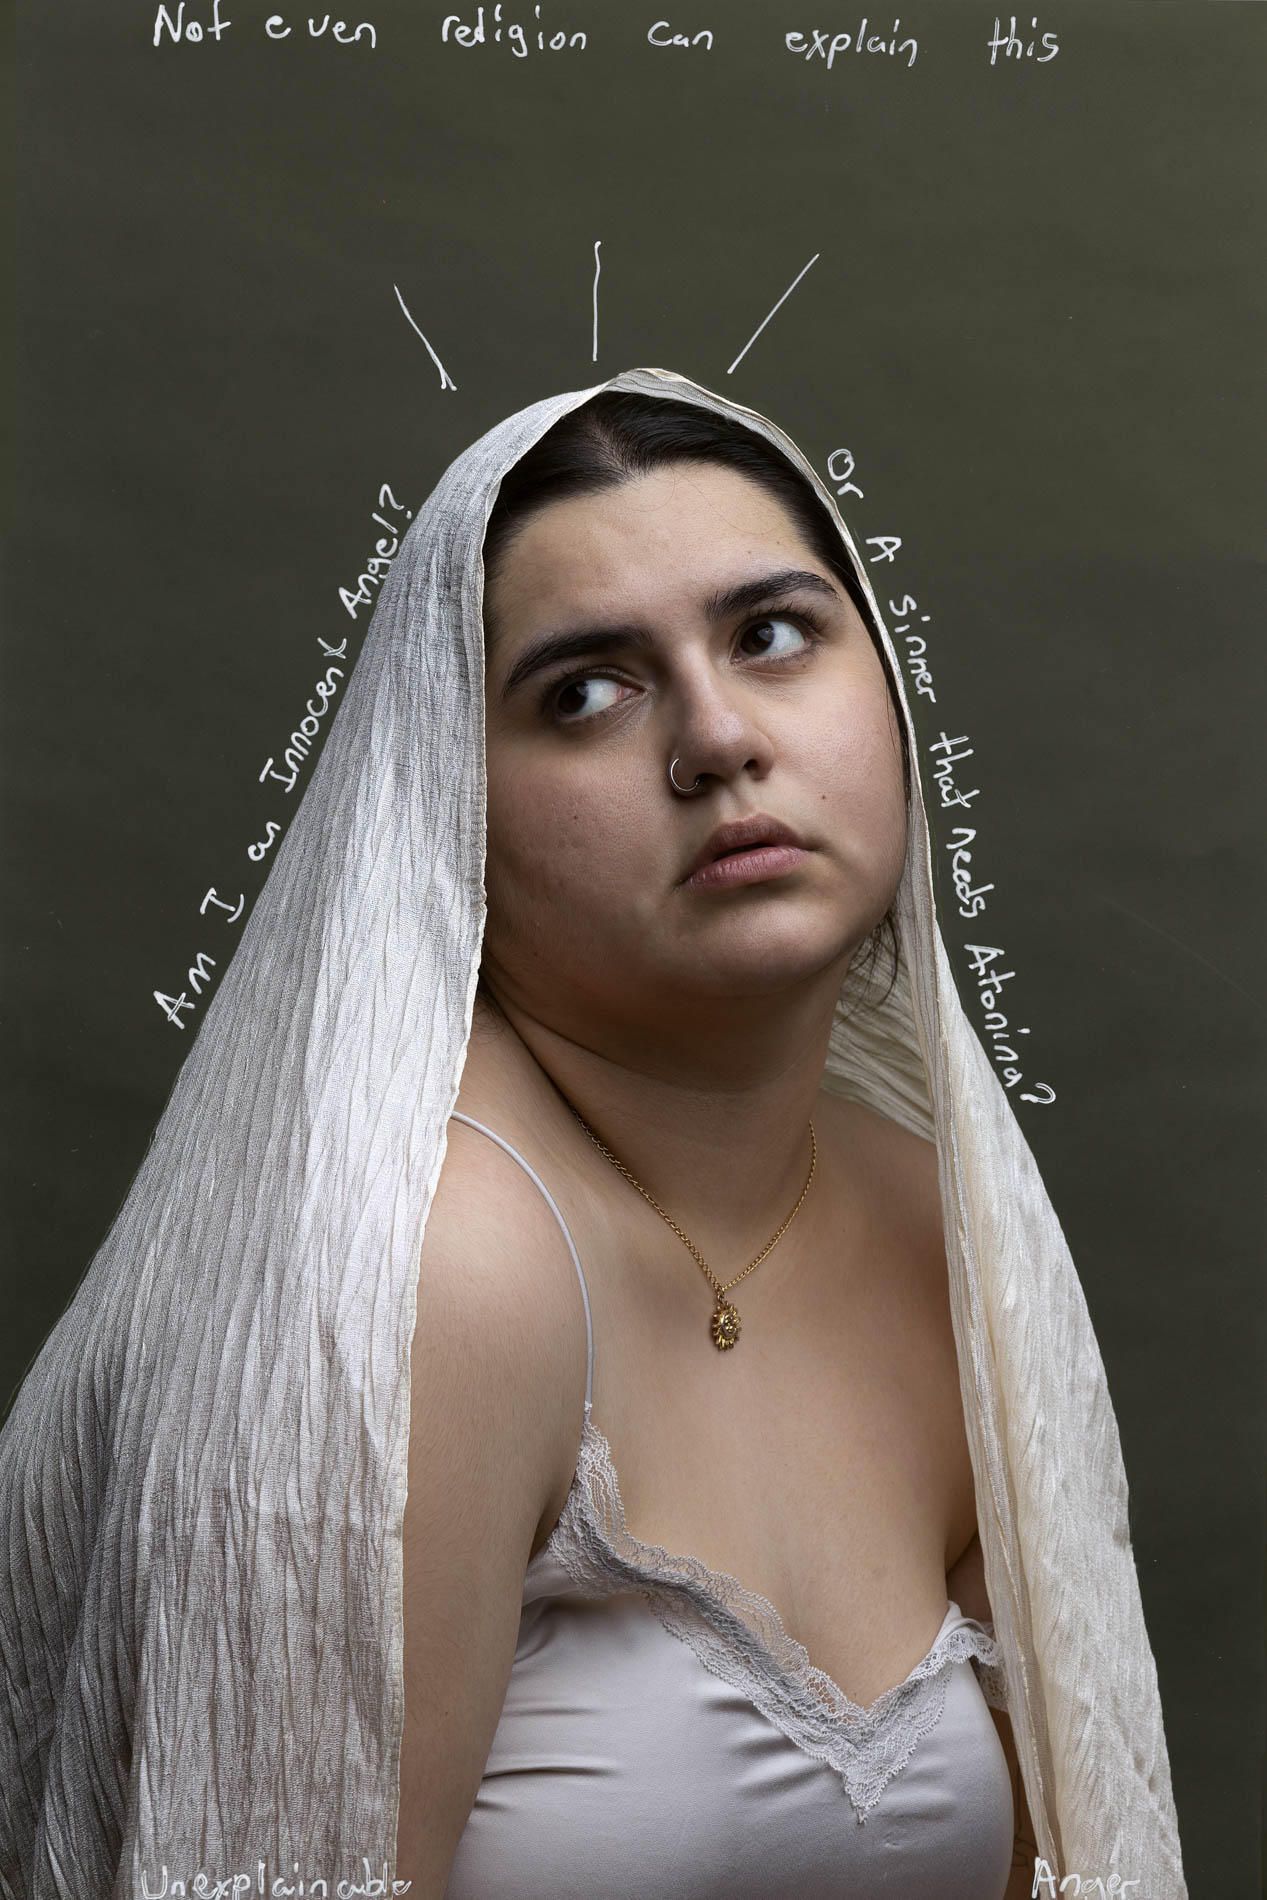 The photo features a young woman who is wearing a off-white veil on the top of her head and a white dress with lace, in front of an olive-green backdrop. She is looking to the side with a sad expression. There is white text on top of the image that reads “not even religion can explain this”, text that surrounds her figure that reads”am I an innocent angel?” On one side and “or a sinner that needs atoning” on the other side, as well as text on the bottom of the image that said “Unexplainable Anger”